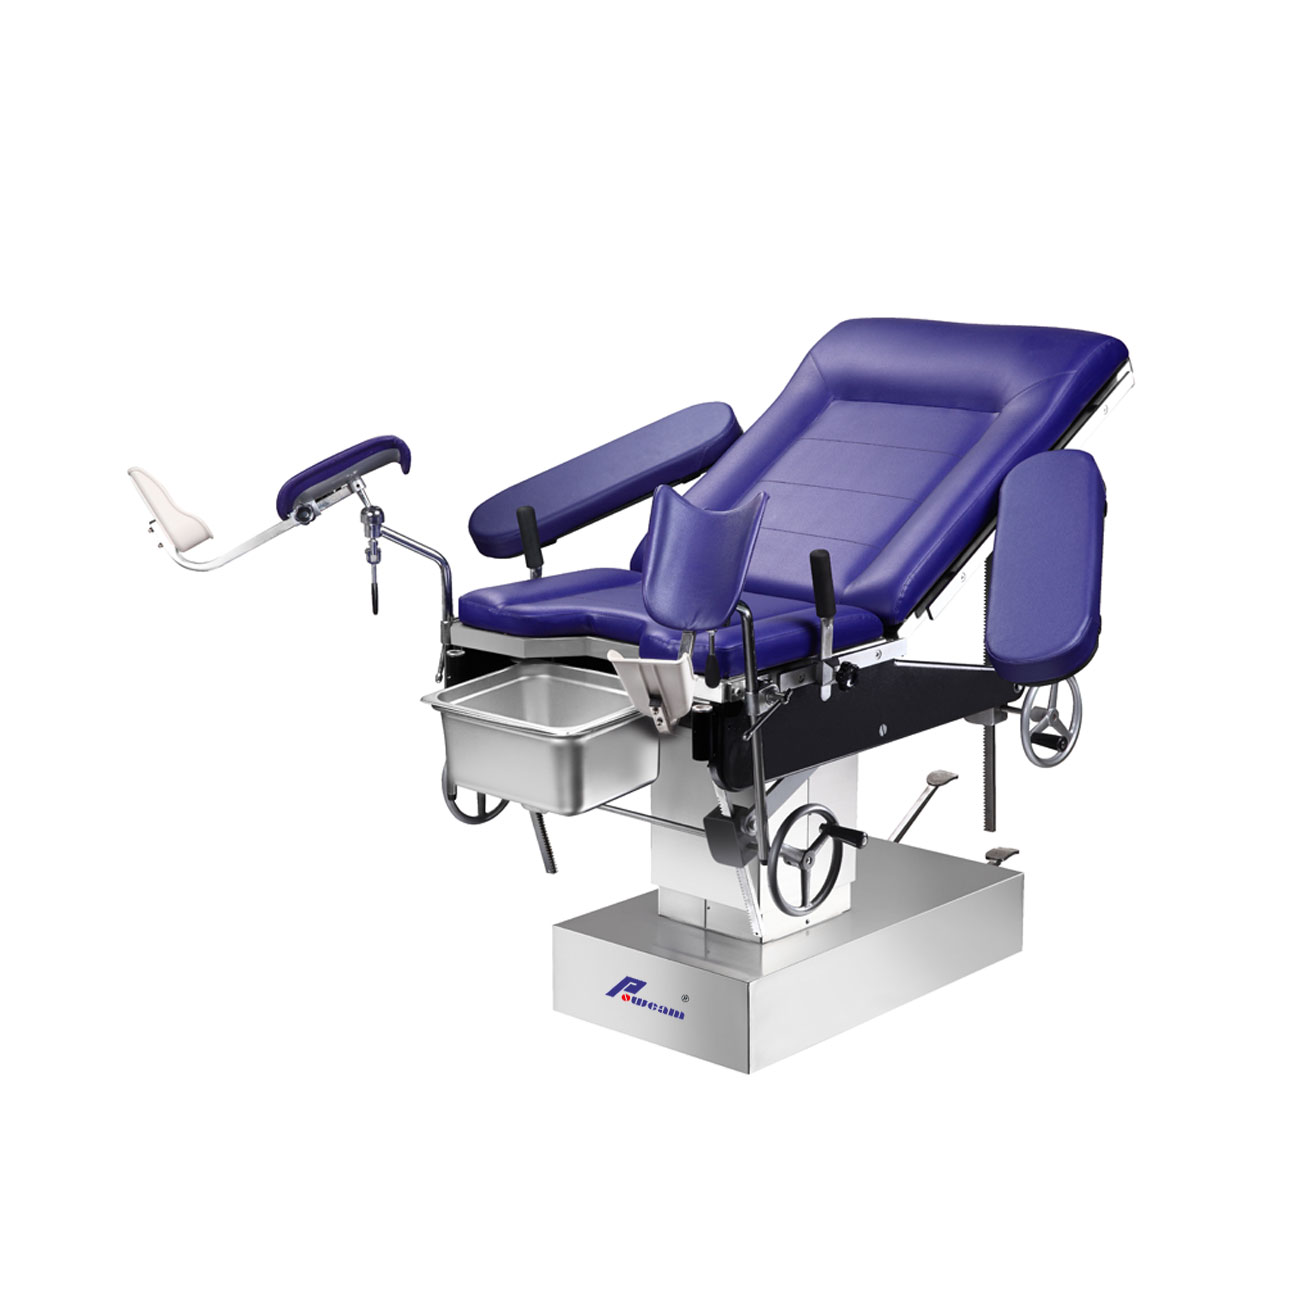 China A3w Manual 3 Functions Hospital Medical Adjustable Bed Manufactures -  China Hospital Bed, Patient Bed